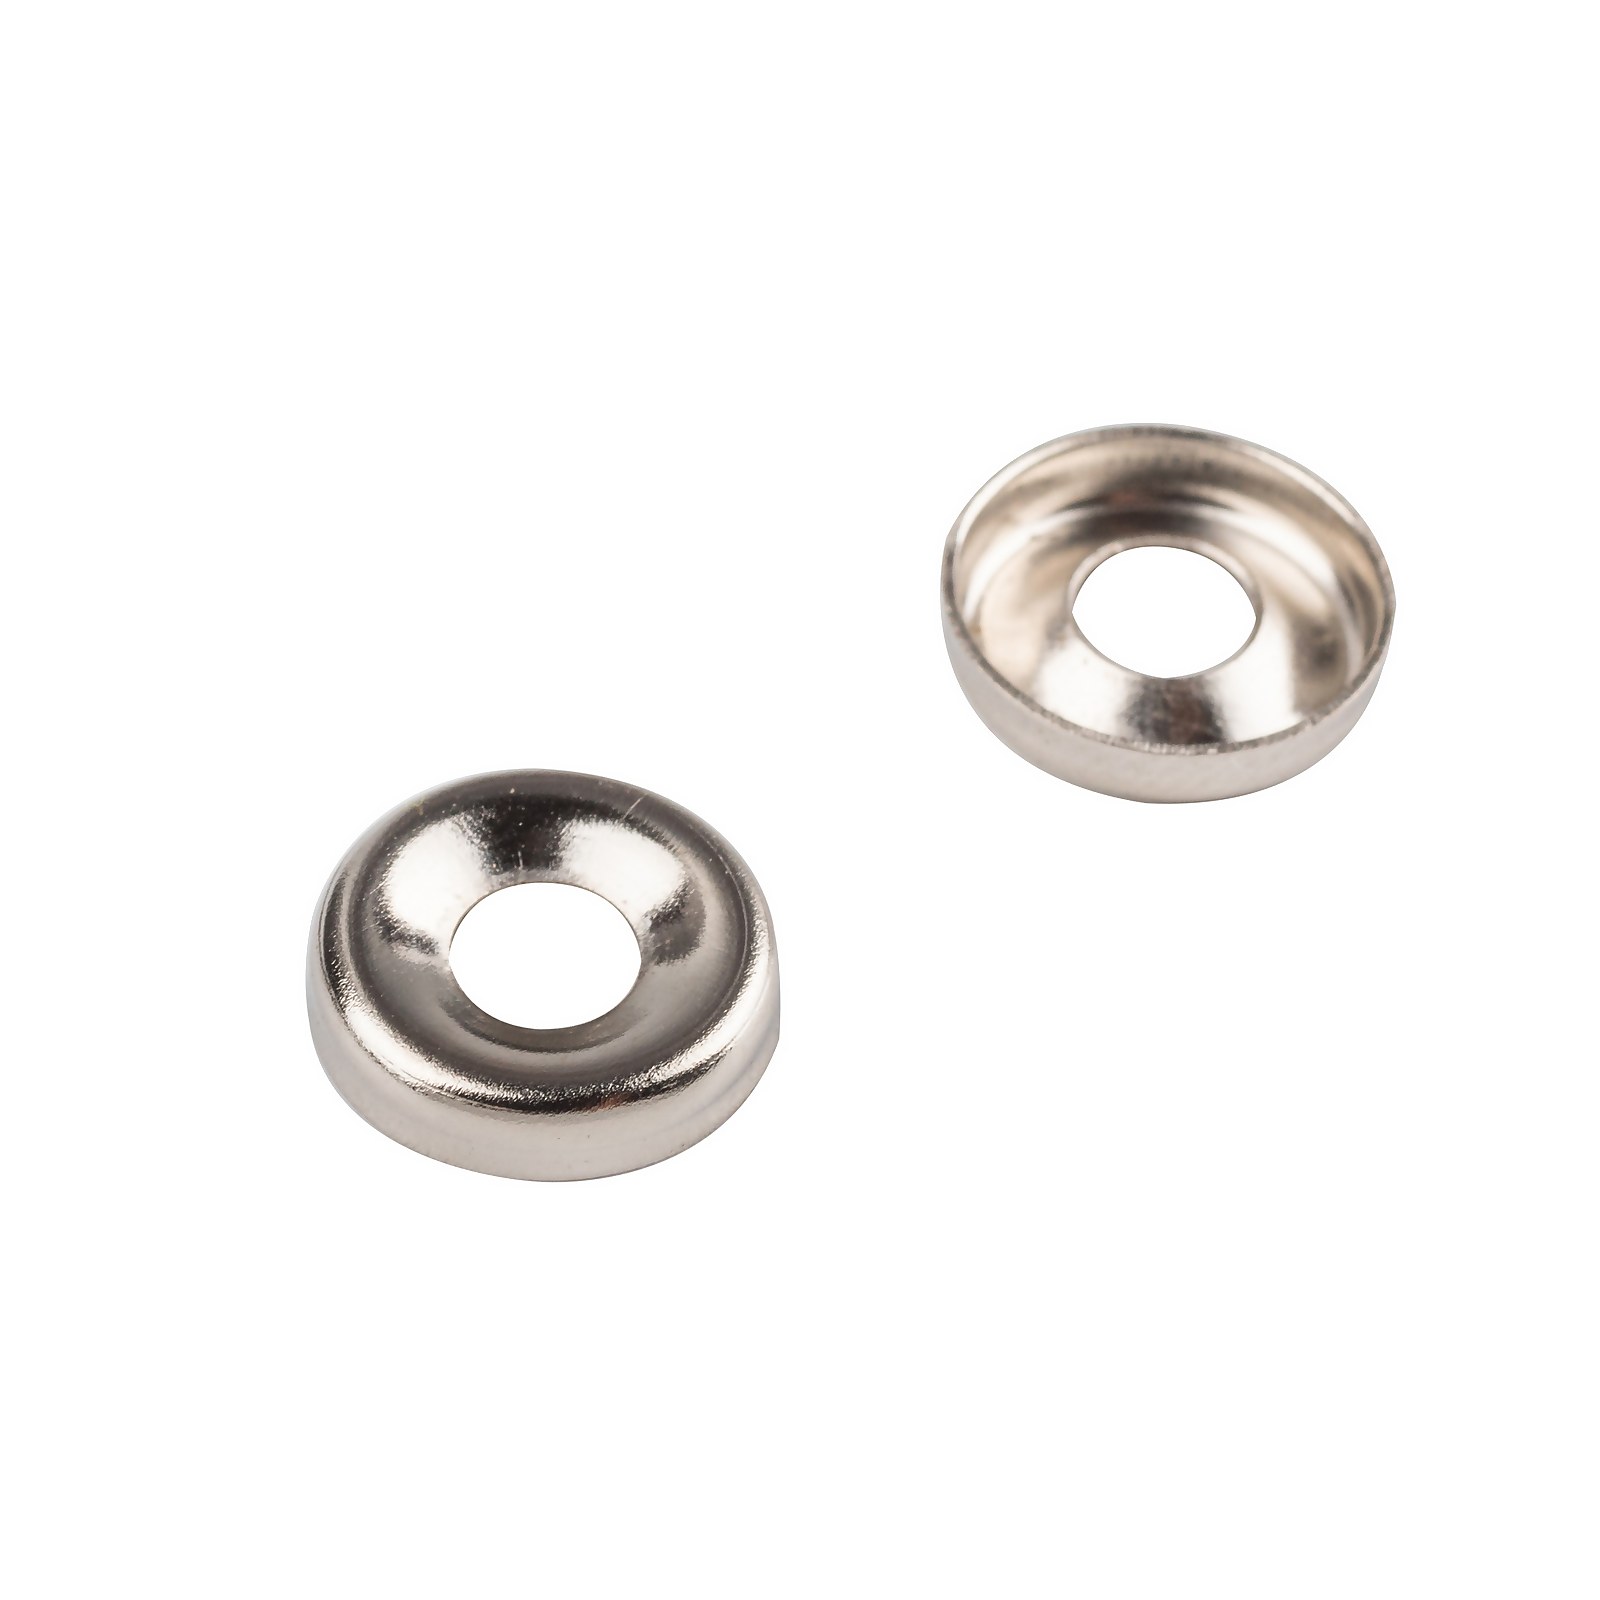 Photo of Homebase Nickel Plated Screw Cup Washer 3.5mm 20 Pack